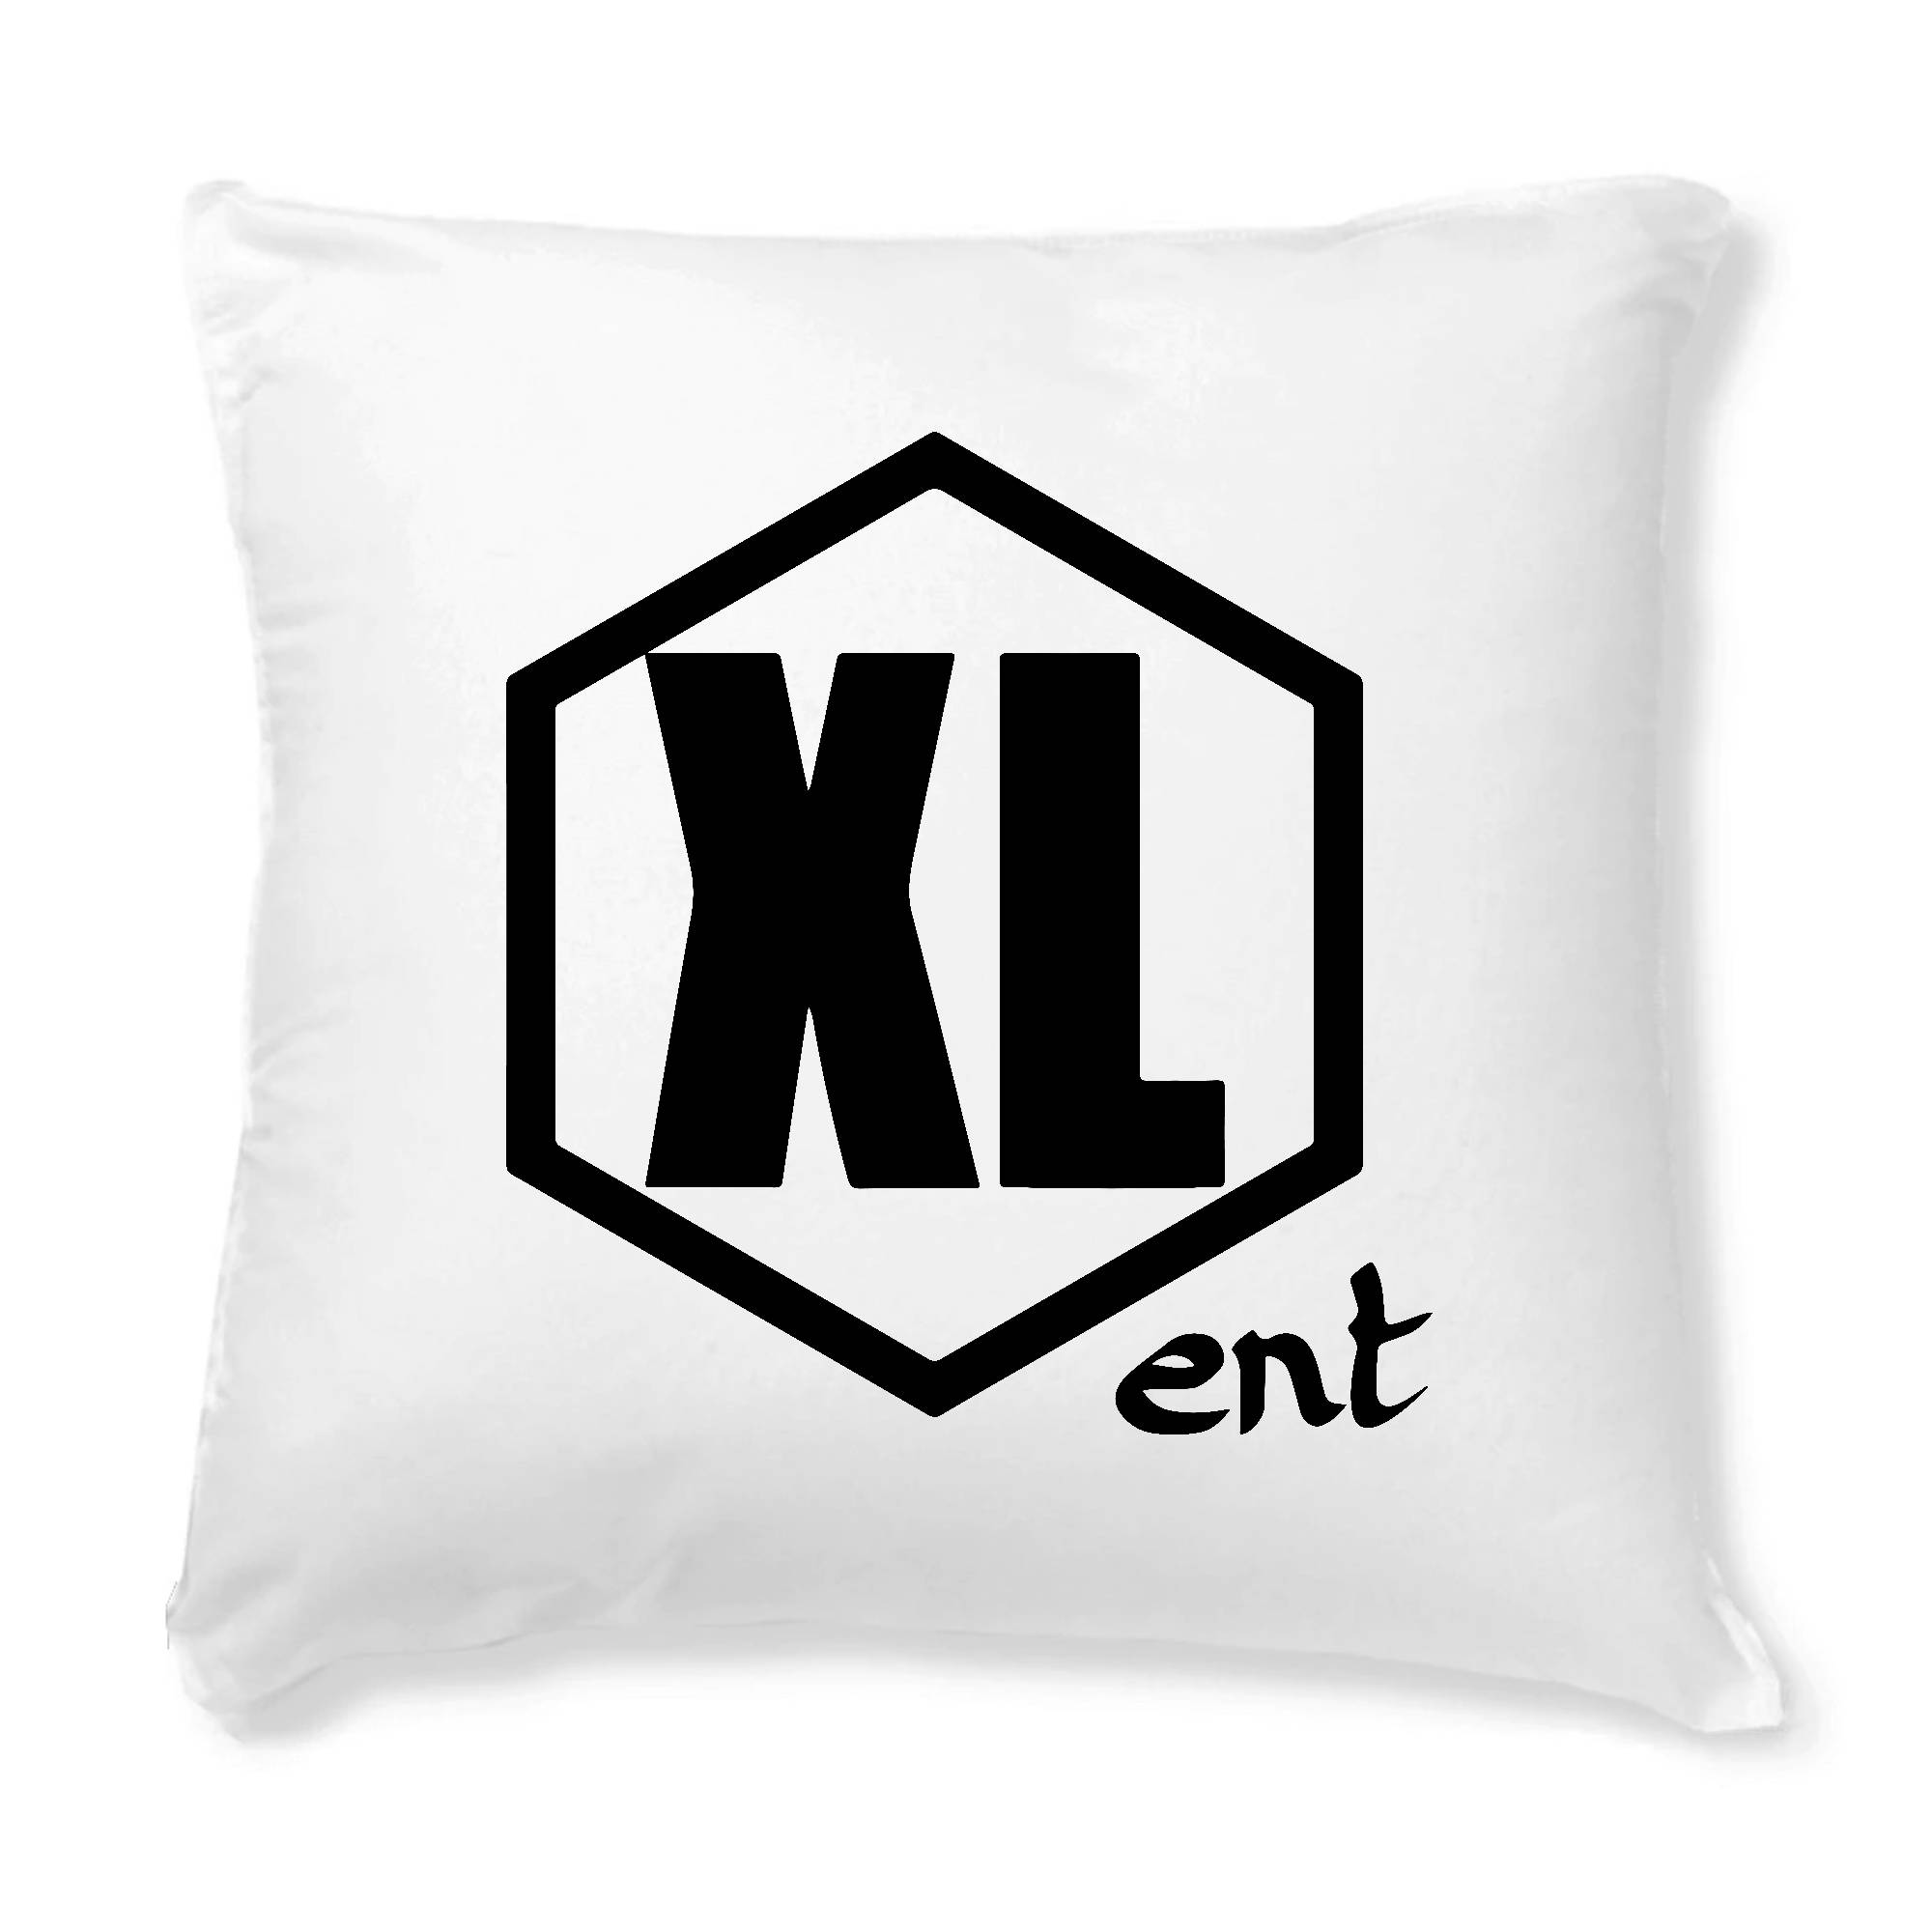 XLEntertainment UK Cushion Cover (NO CUSHION INCLUDED)